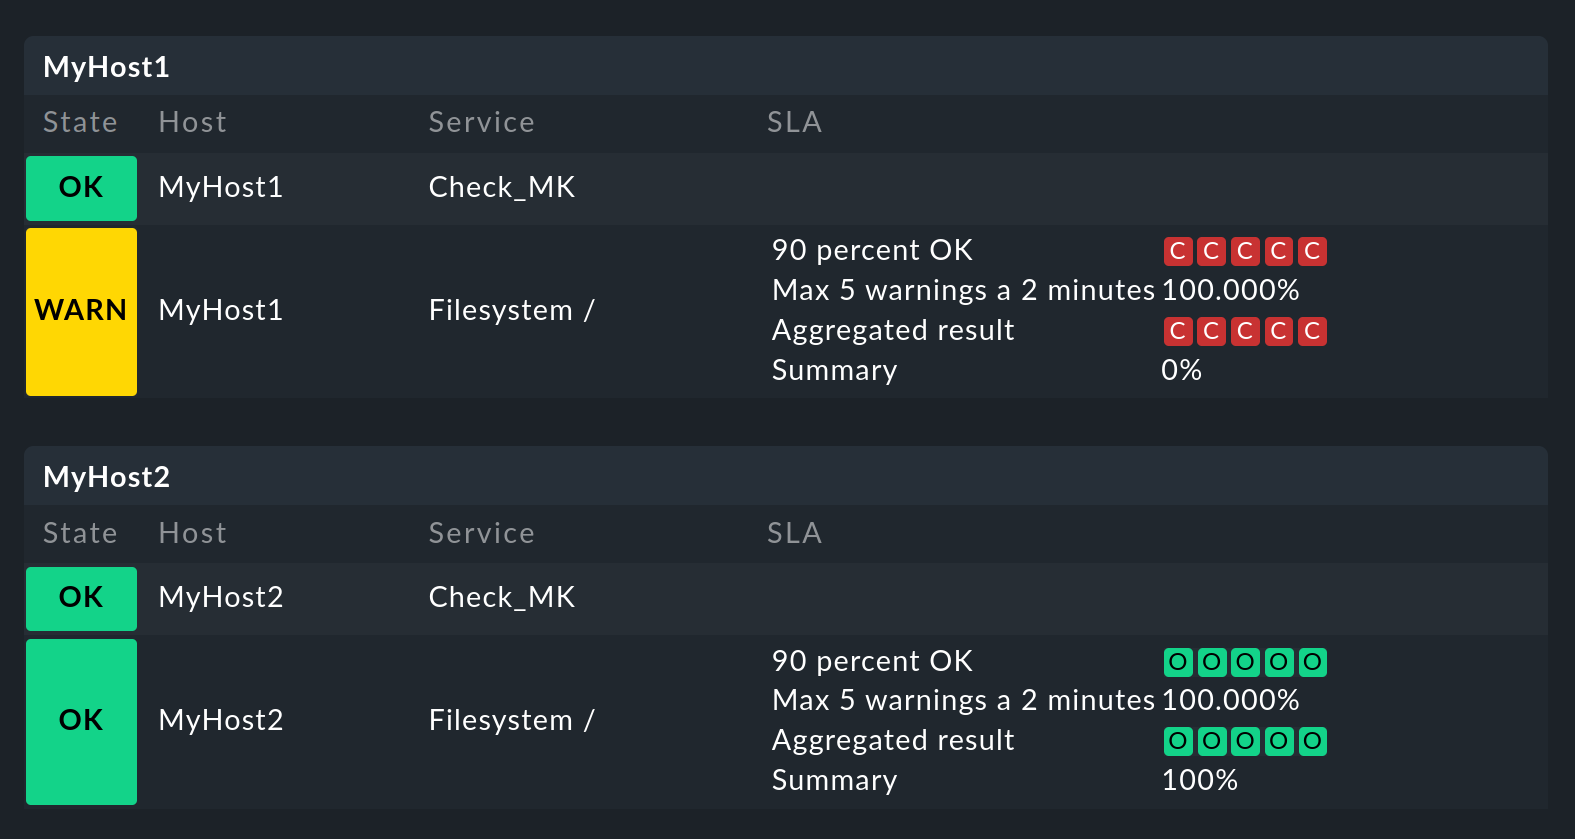 The view in monitoring shows two services with SLA information.